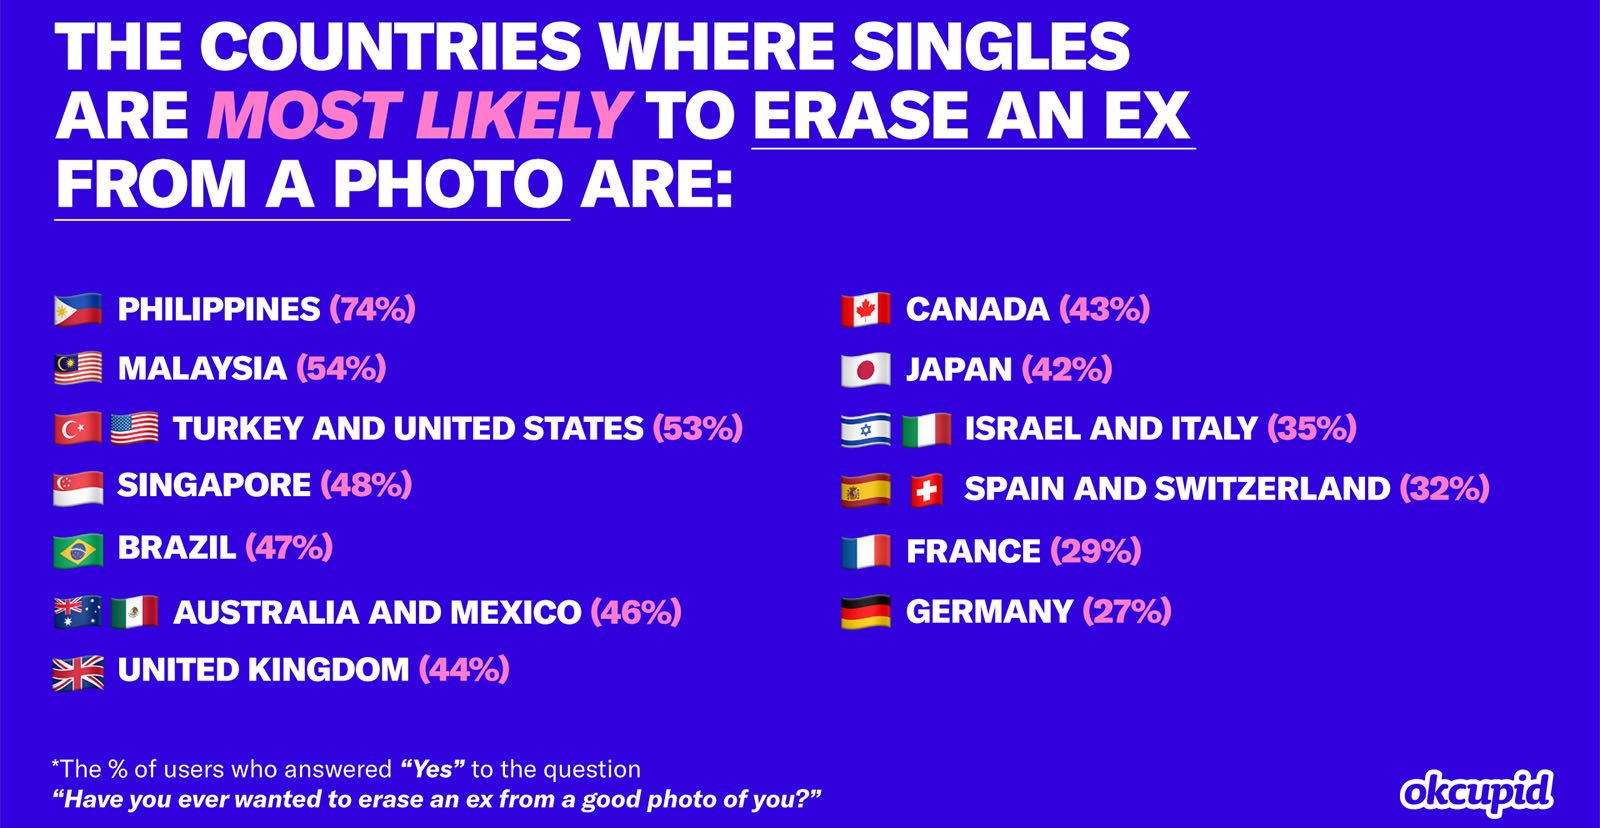 Infographic with a purple background listing countries where singles are most likely to erase an ex from a photo, with associated percentages, sponsored by okcupid. includes icons of country flags next to each country name.